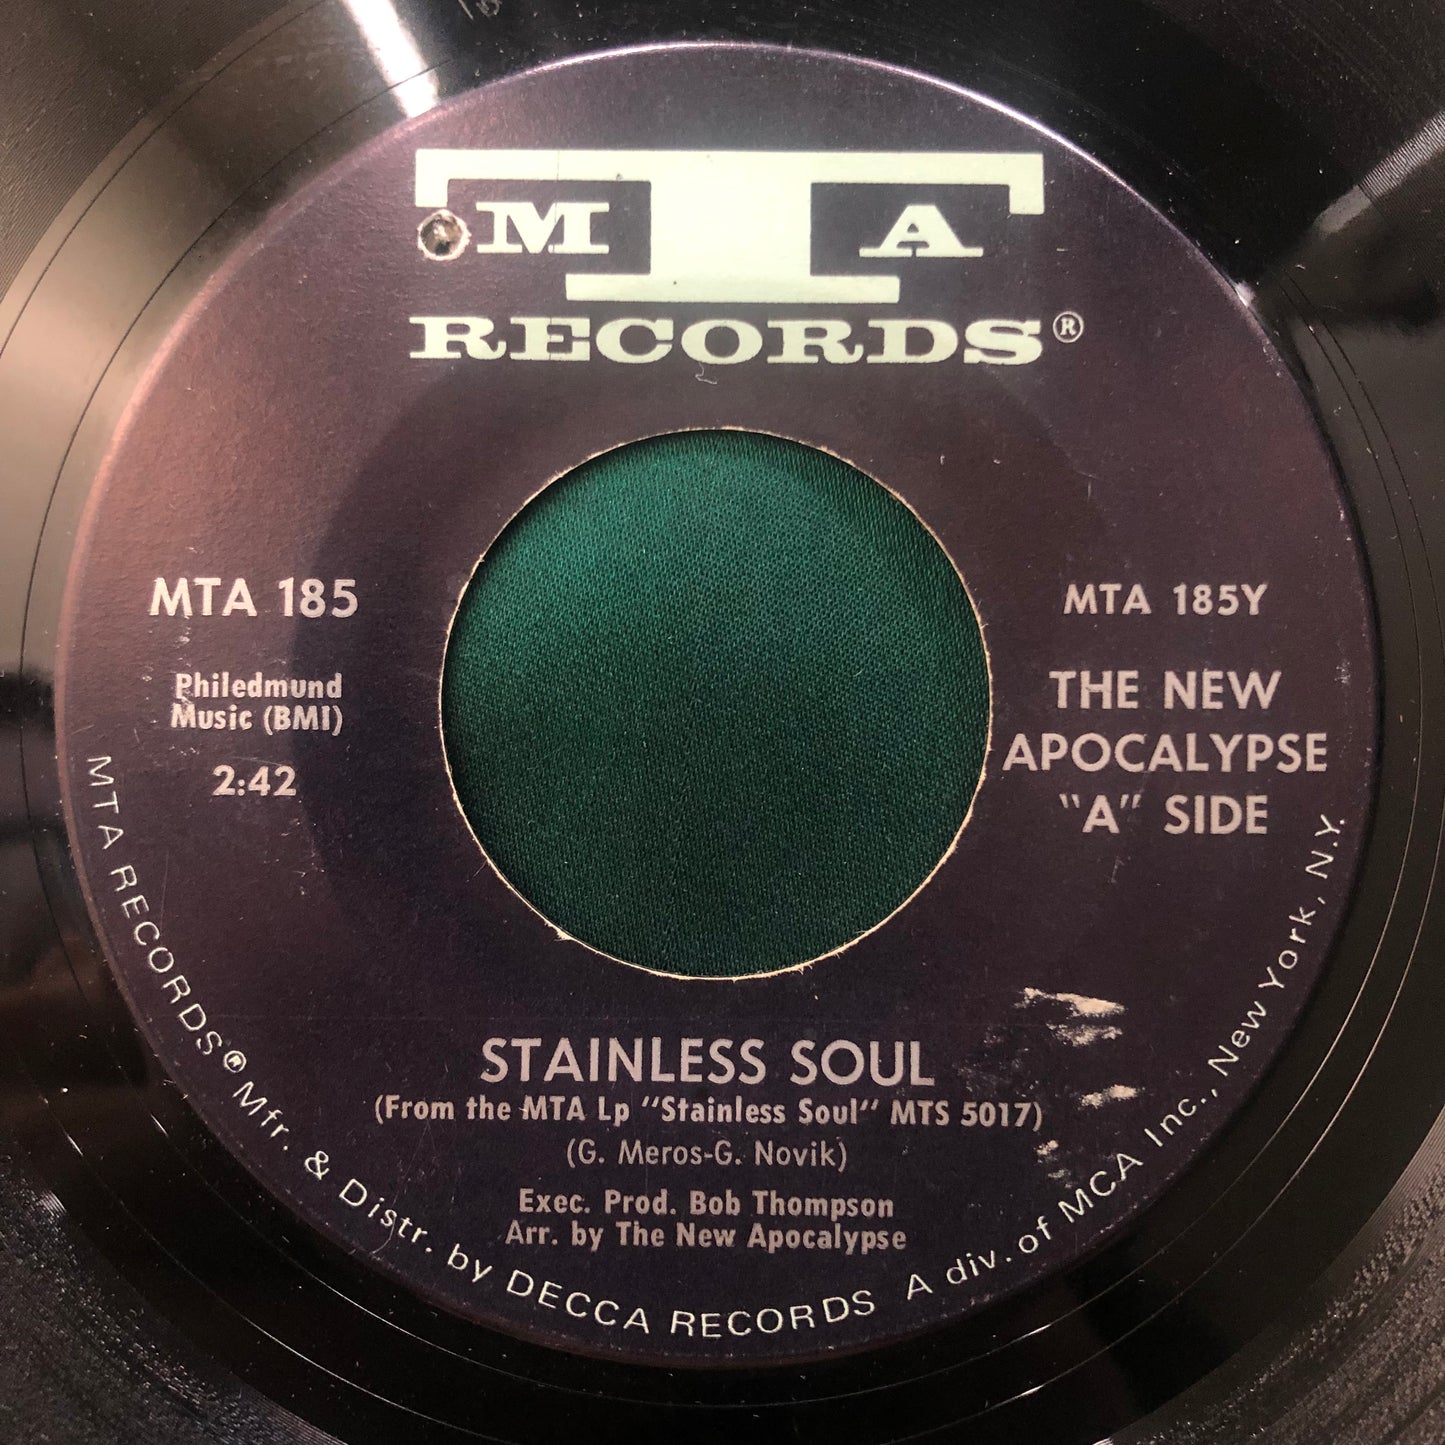 The New Apocalypse - Stainless Soul / Wichita Lineman 1970 Great Psych/Funk 45